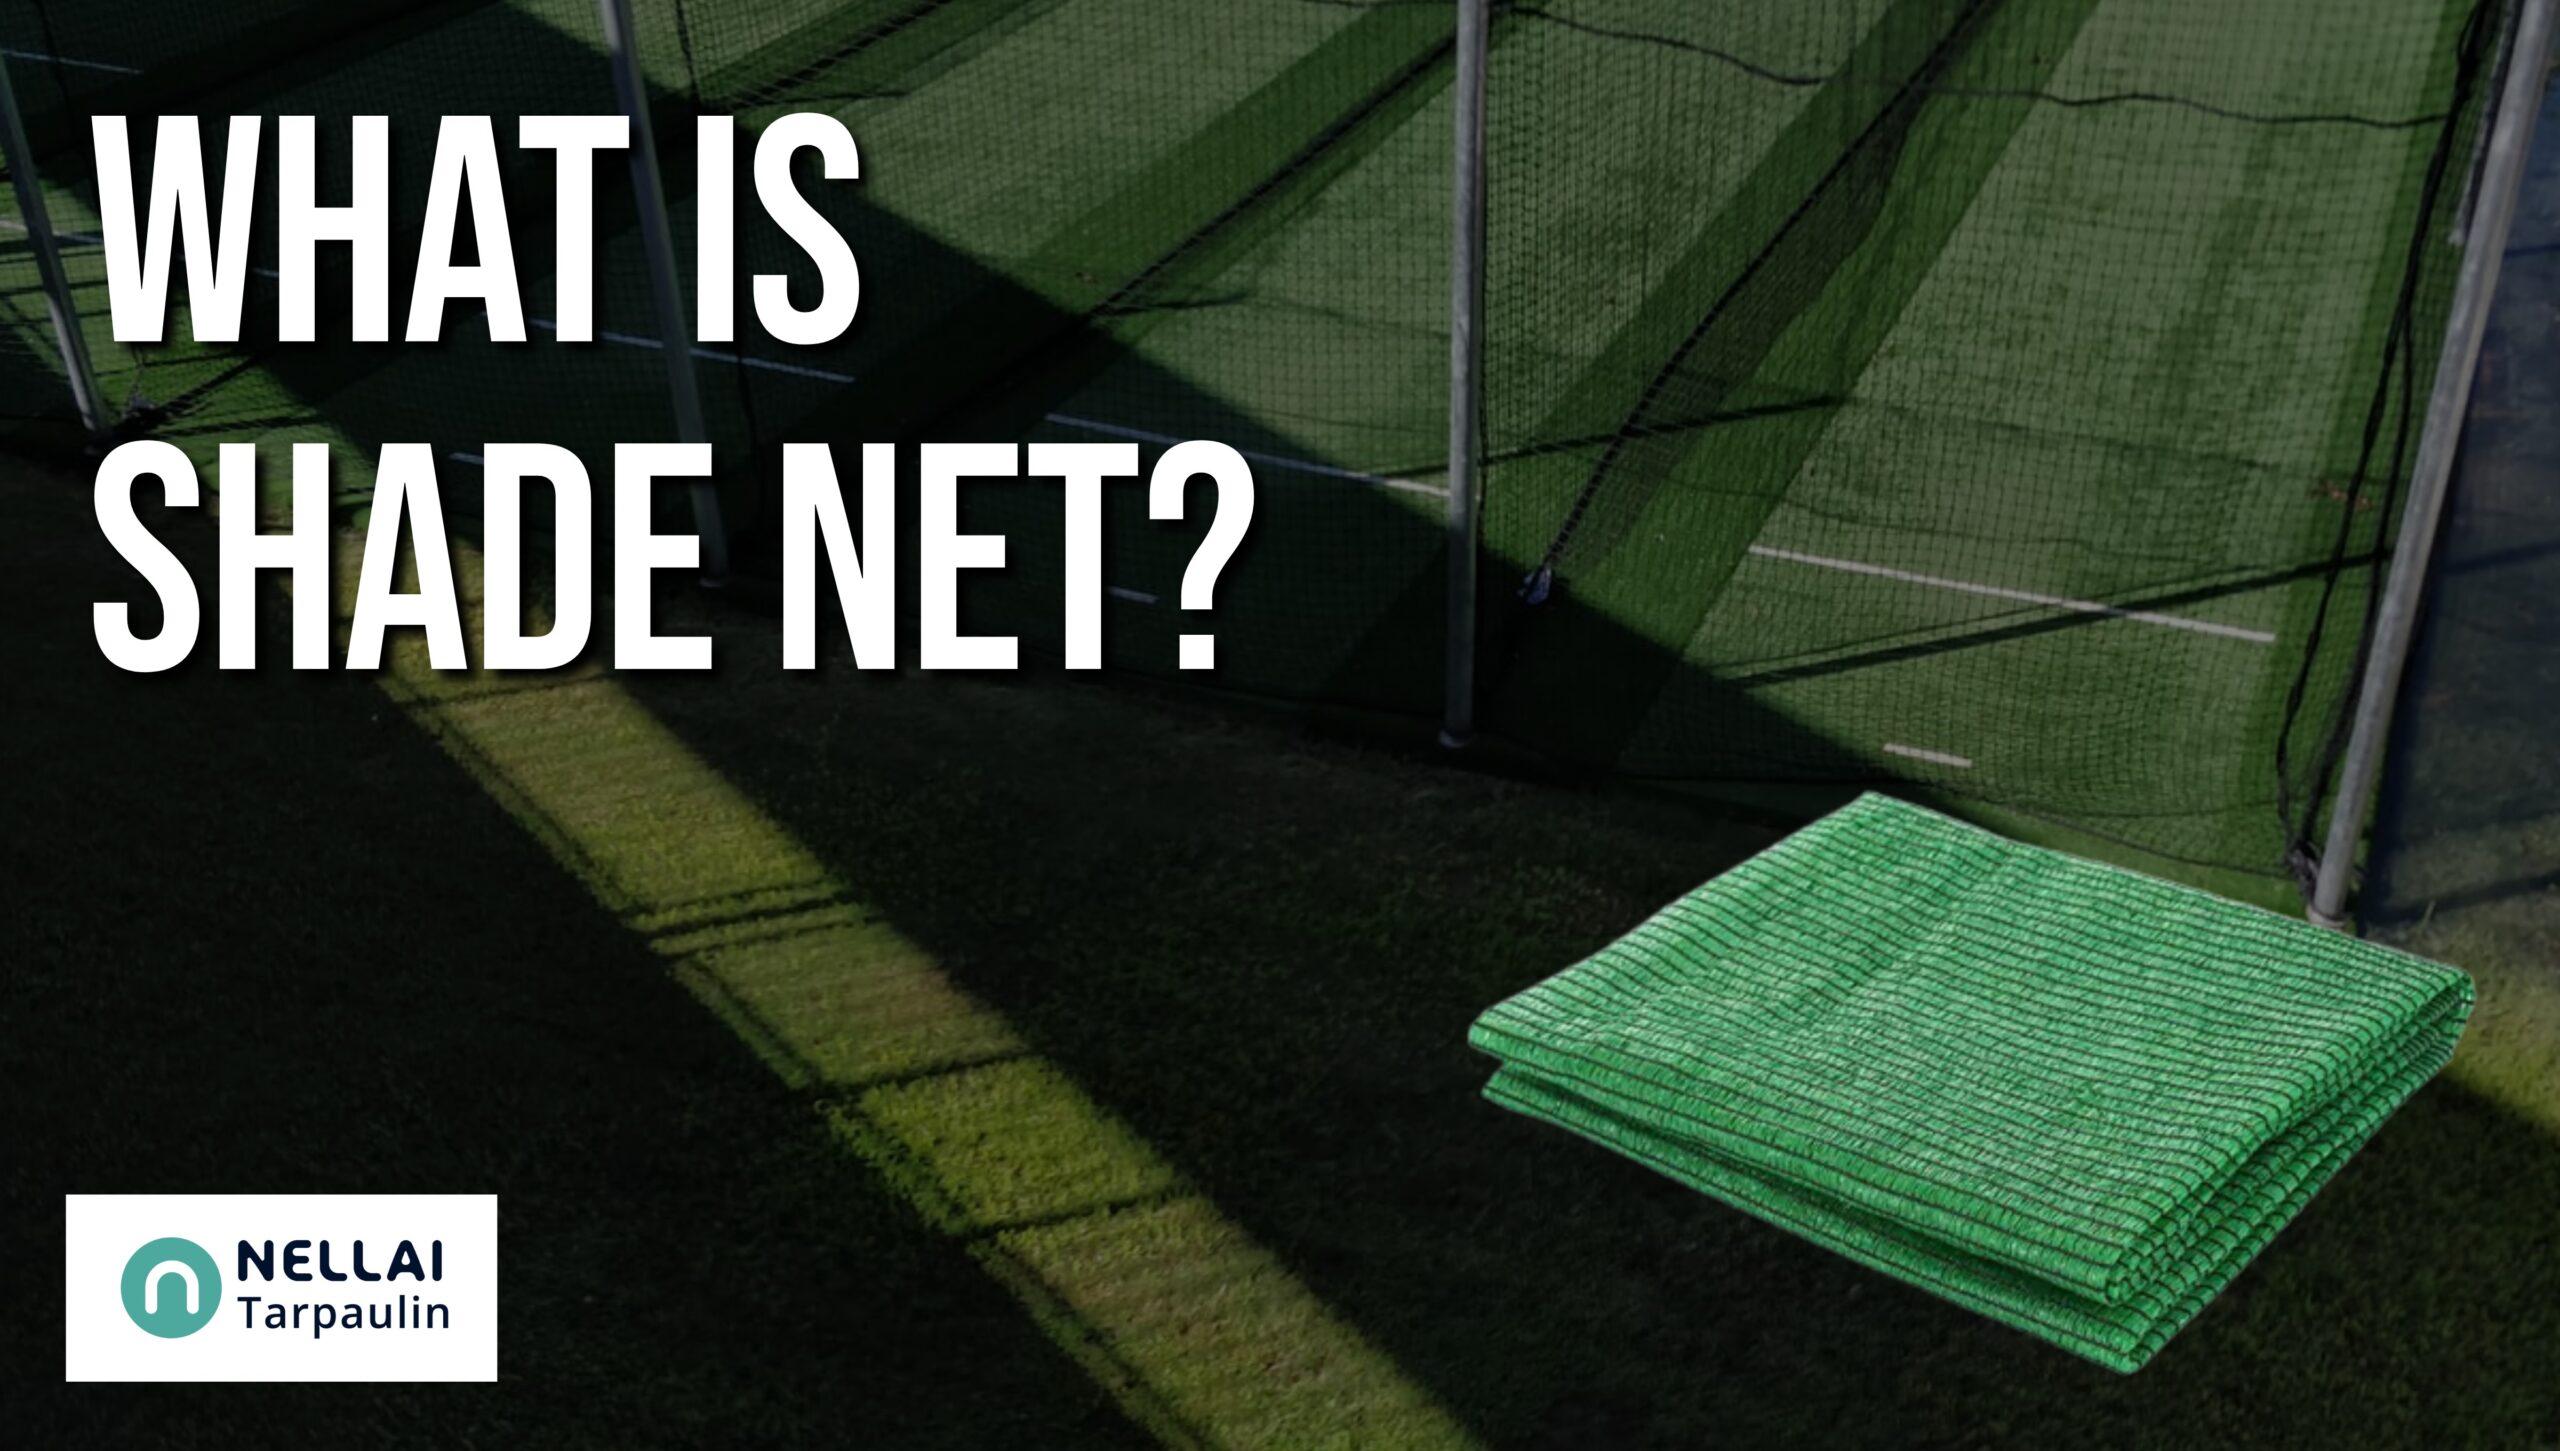 What is Shade Net?